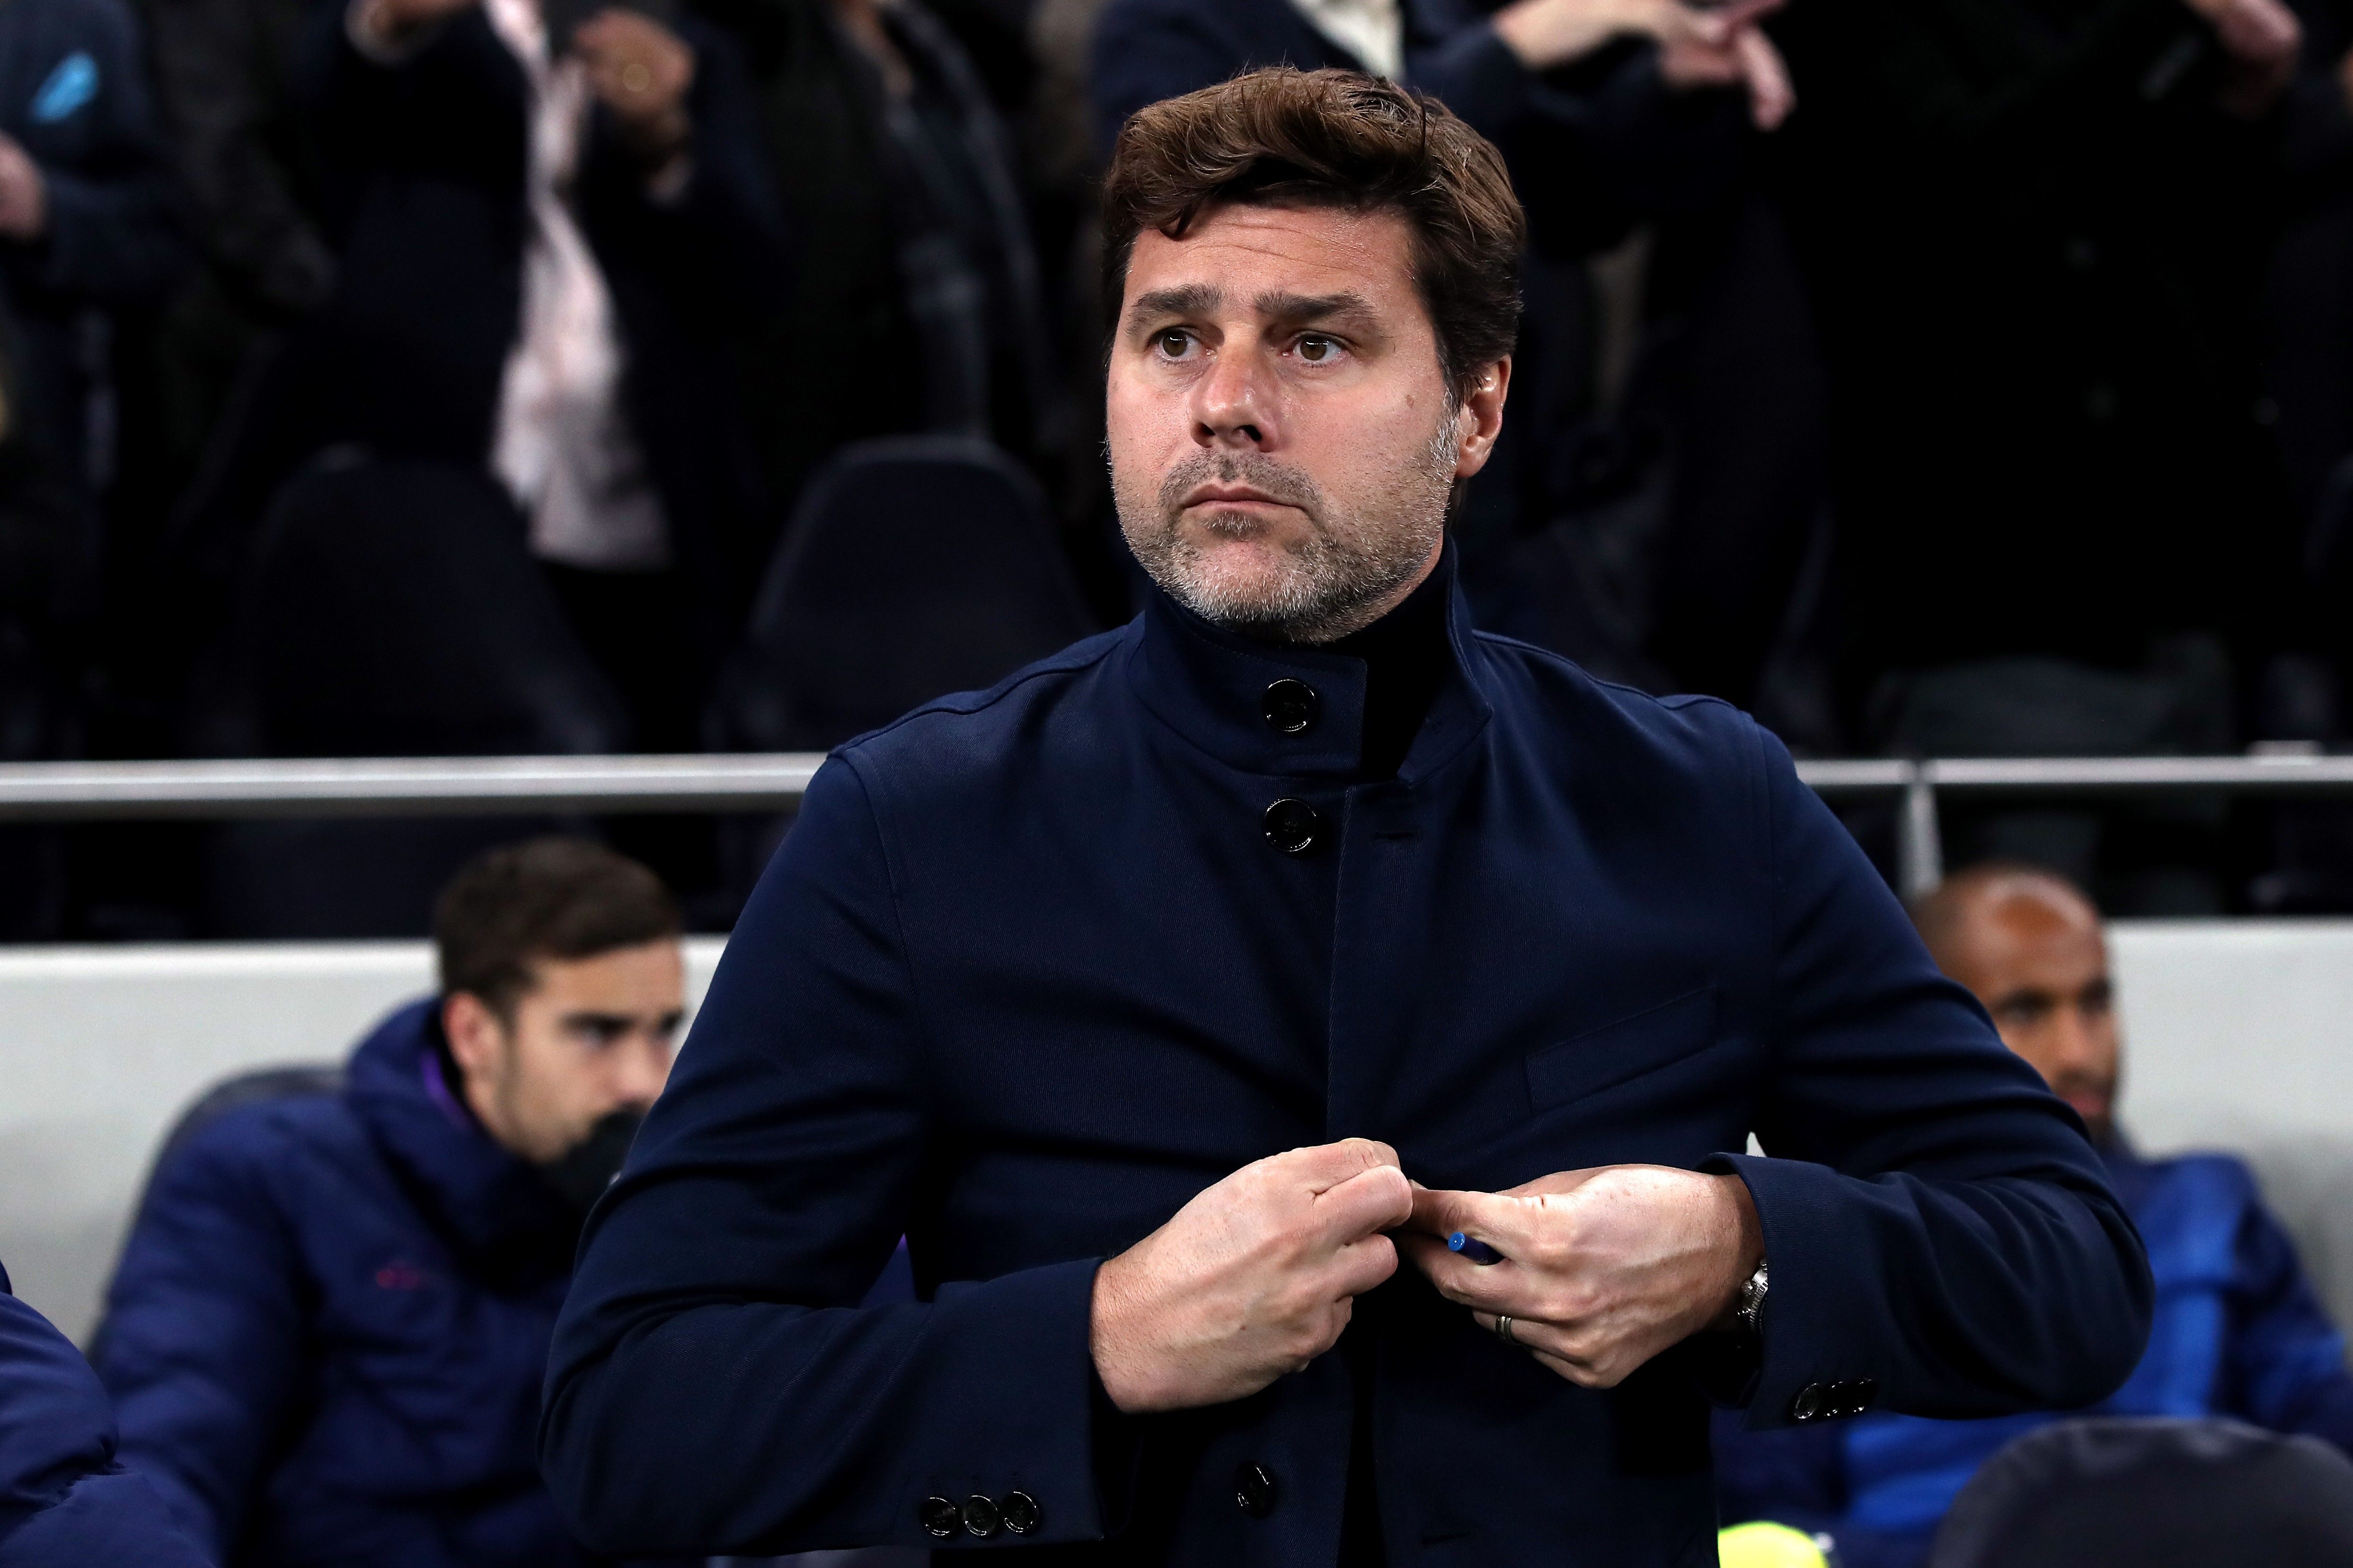 Chelsea appoint Mauricio Pochettino as new head coach less than 24 hours after disastrous season ends